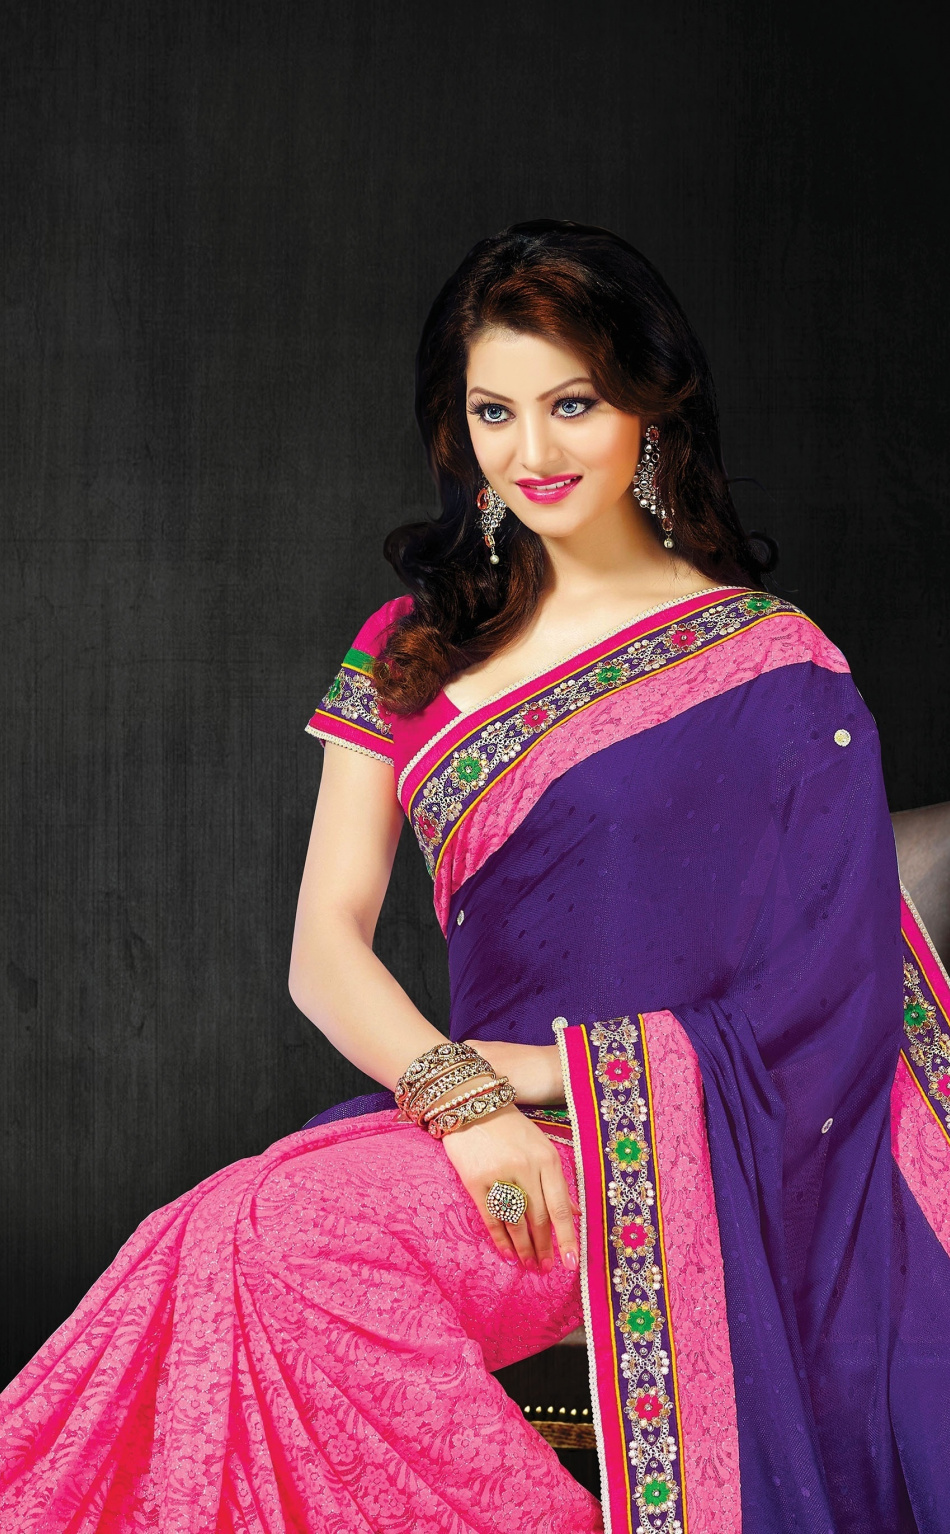 Wallpaper Urvashi Rautela Indian Celebrity Saree Urvashi Rautela Hd Photos Download 179480 Hd Wallpaper Backgrounds Download When her royal and pricey saree from her cousin's wedding made it to news, it was only the beginning of her affair with this indian ethnic wear. urvashi rautela hd photos download